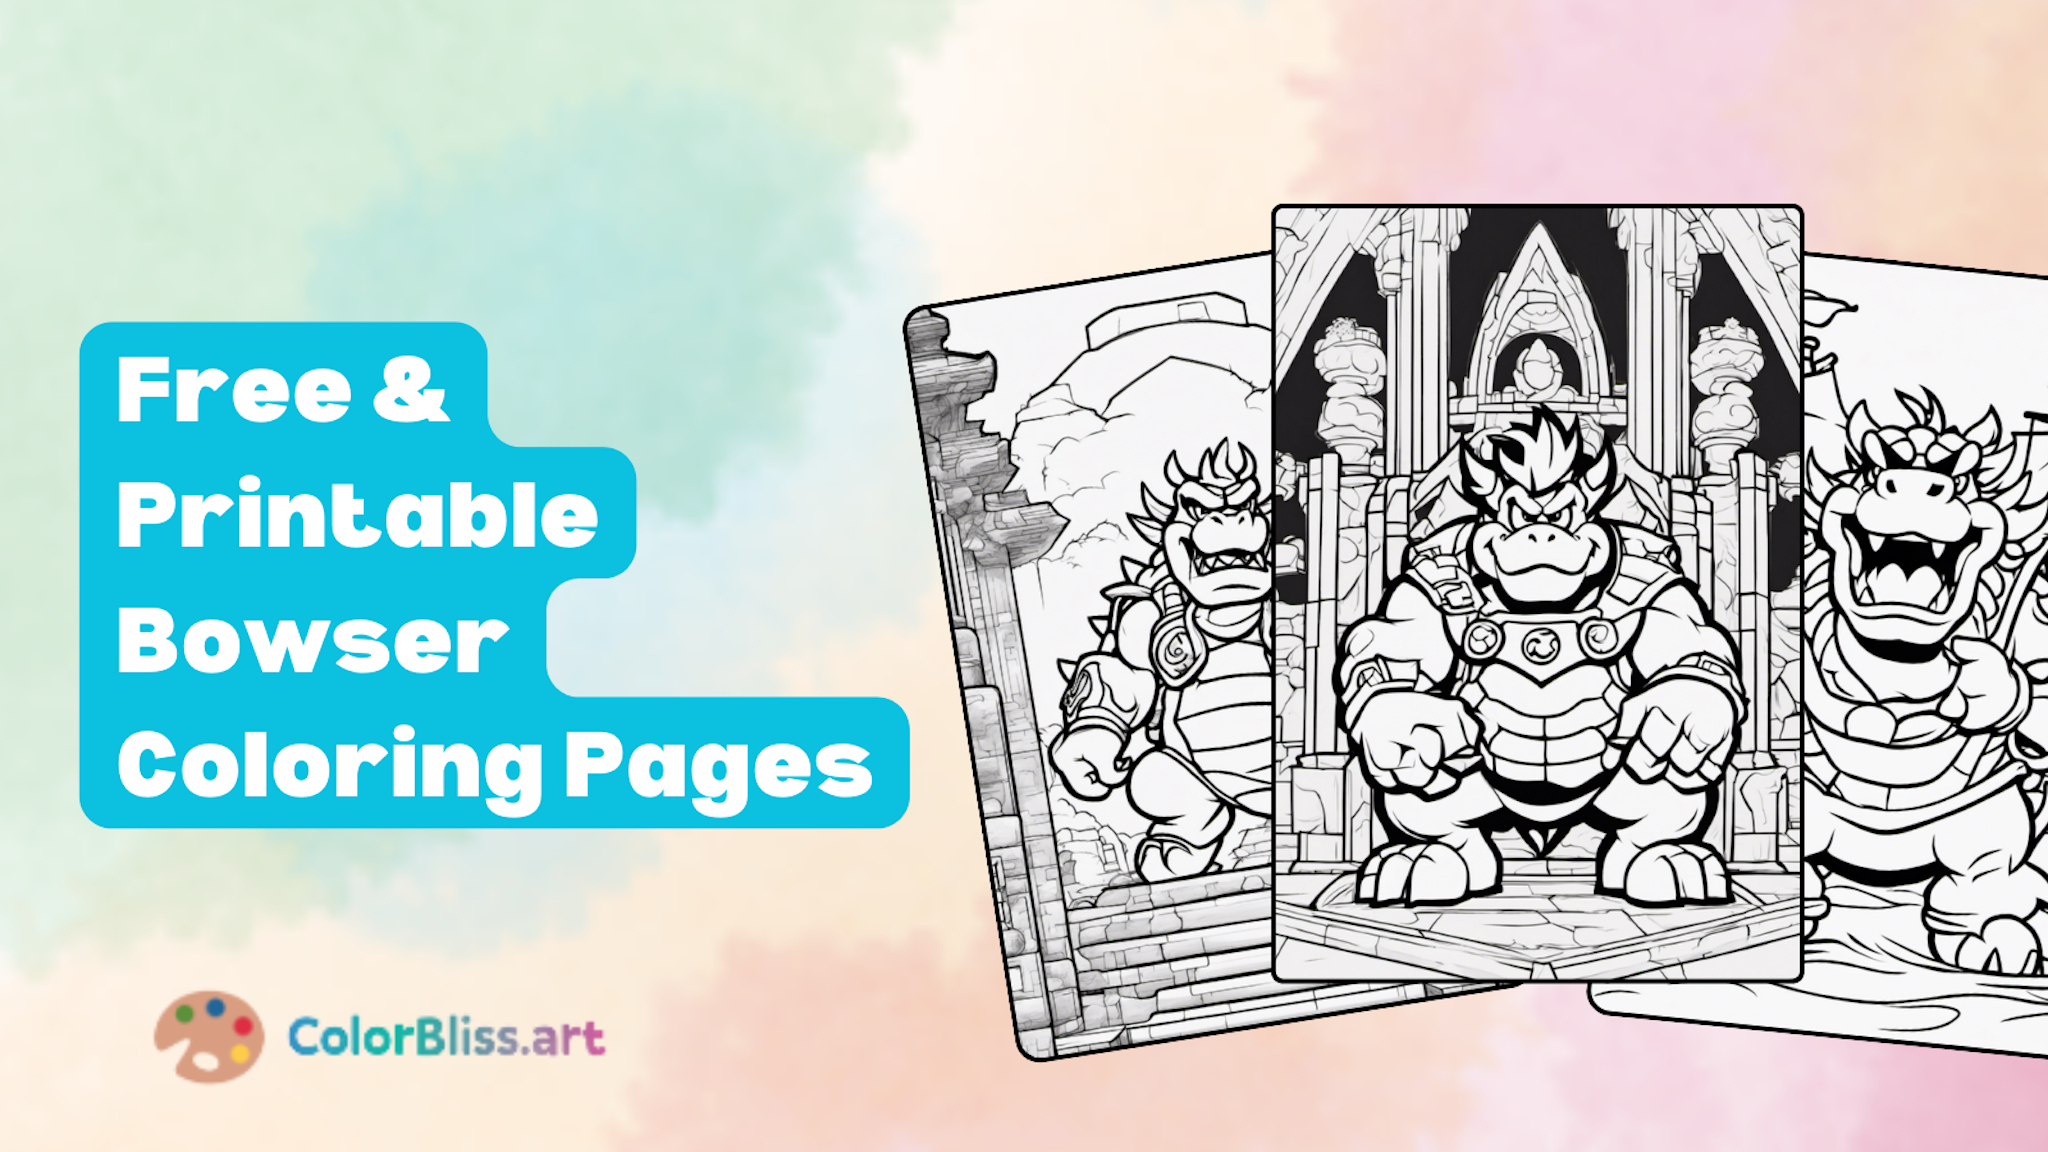 A coloring page for 17 Bowser coloring pages